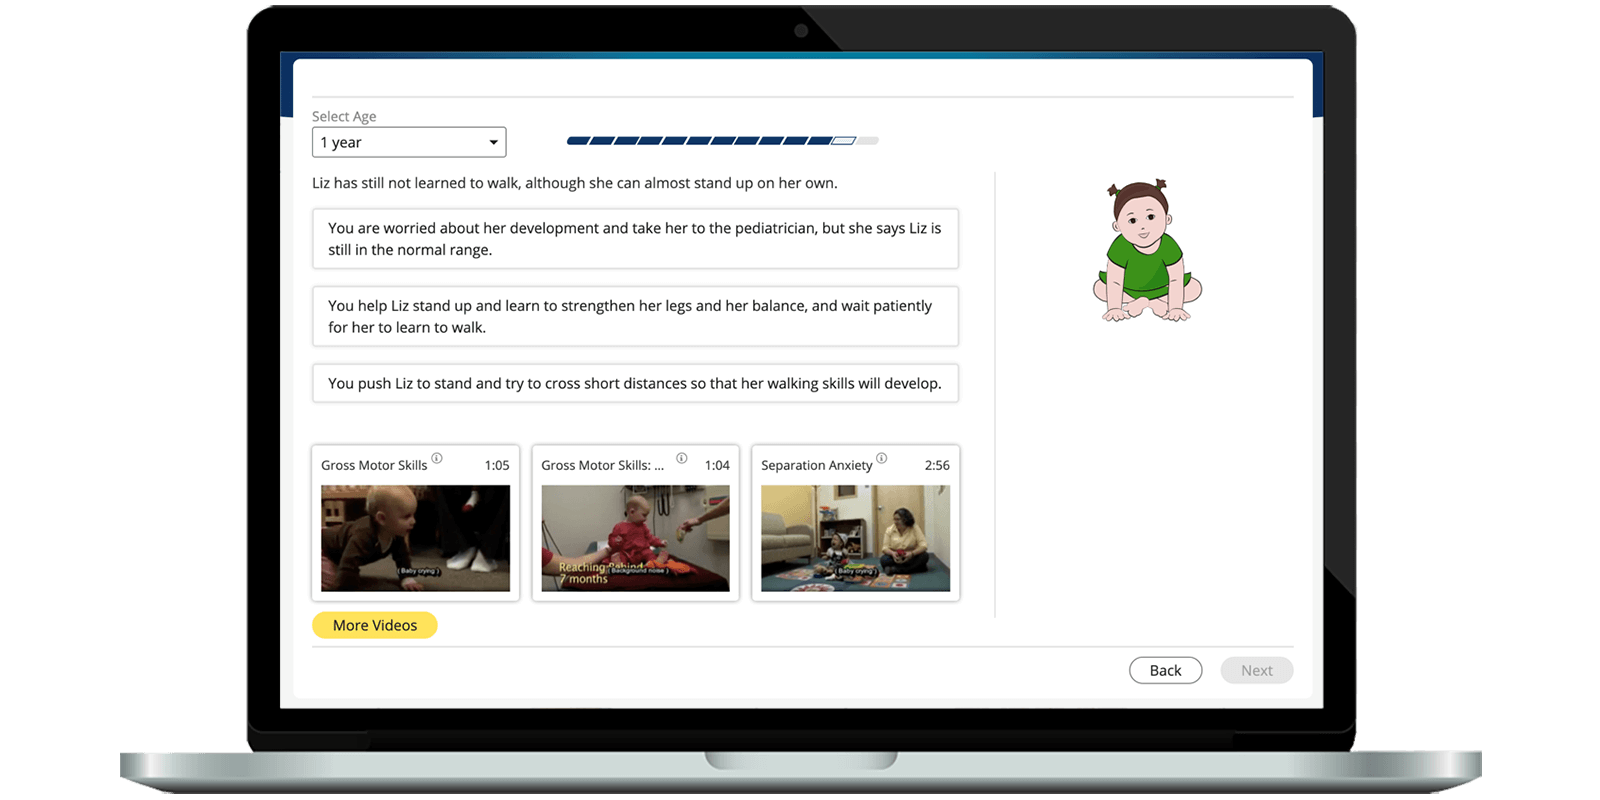 Sample case study featuring authentic feedback from professionals and offering access to related video clips in relation to a one-year-old who has not learned to walk.  